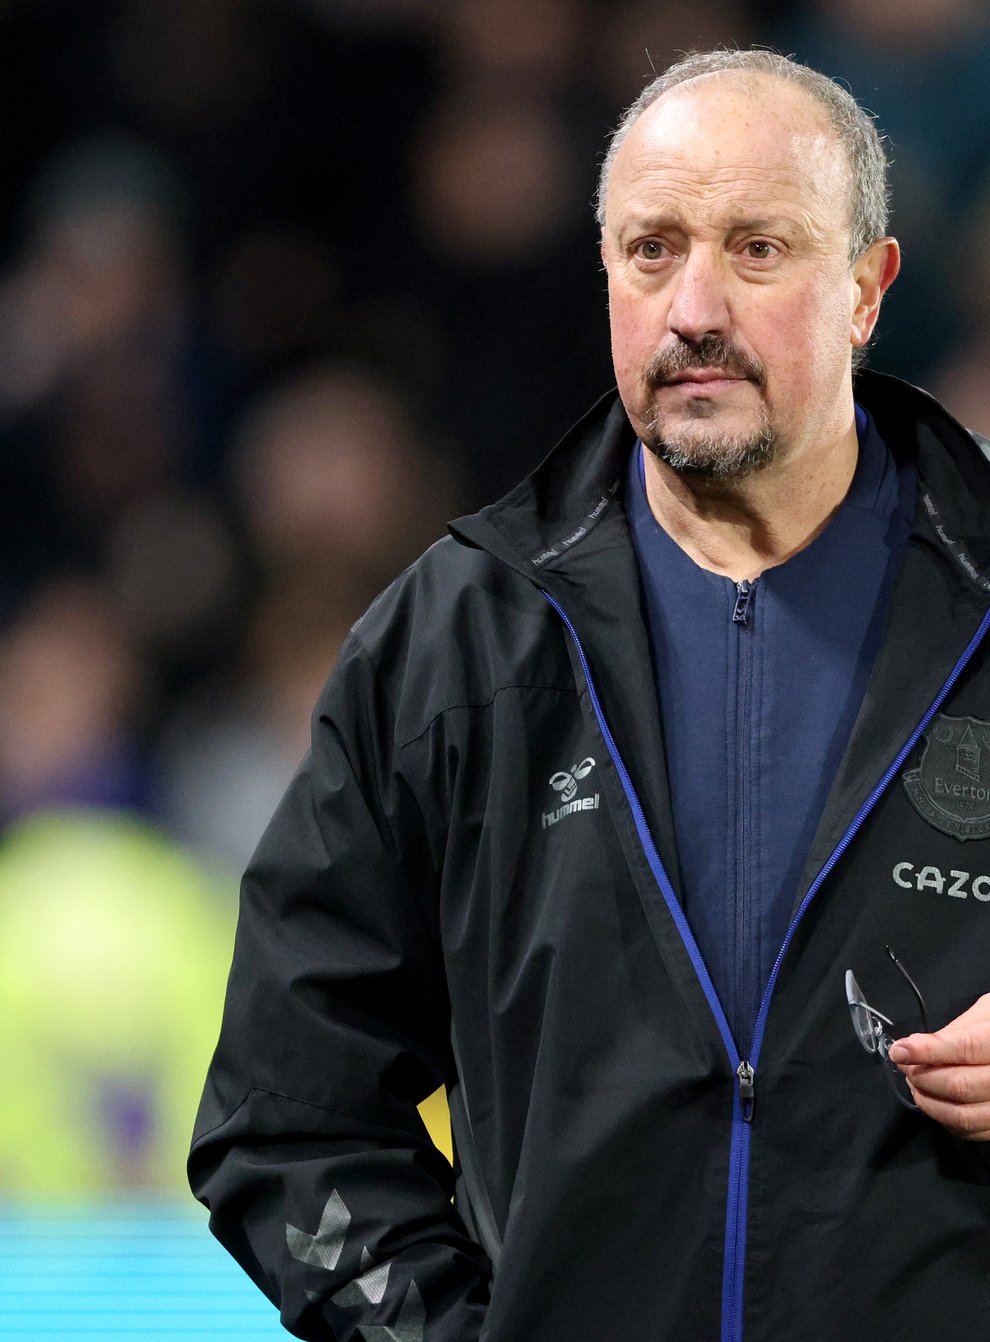 Rafael Benitez insisted he came to Everton to “fix issues” that had arisen over the last few years after Everton’s 2-1 defeat at Norwich (Richard Sellers/PA)